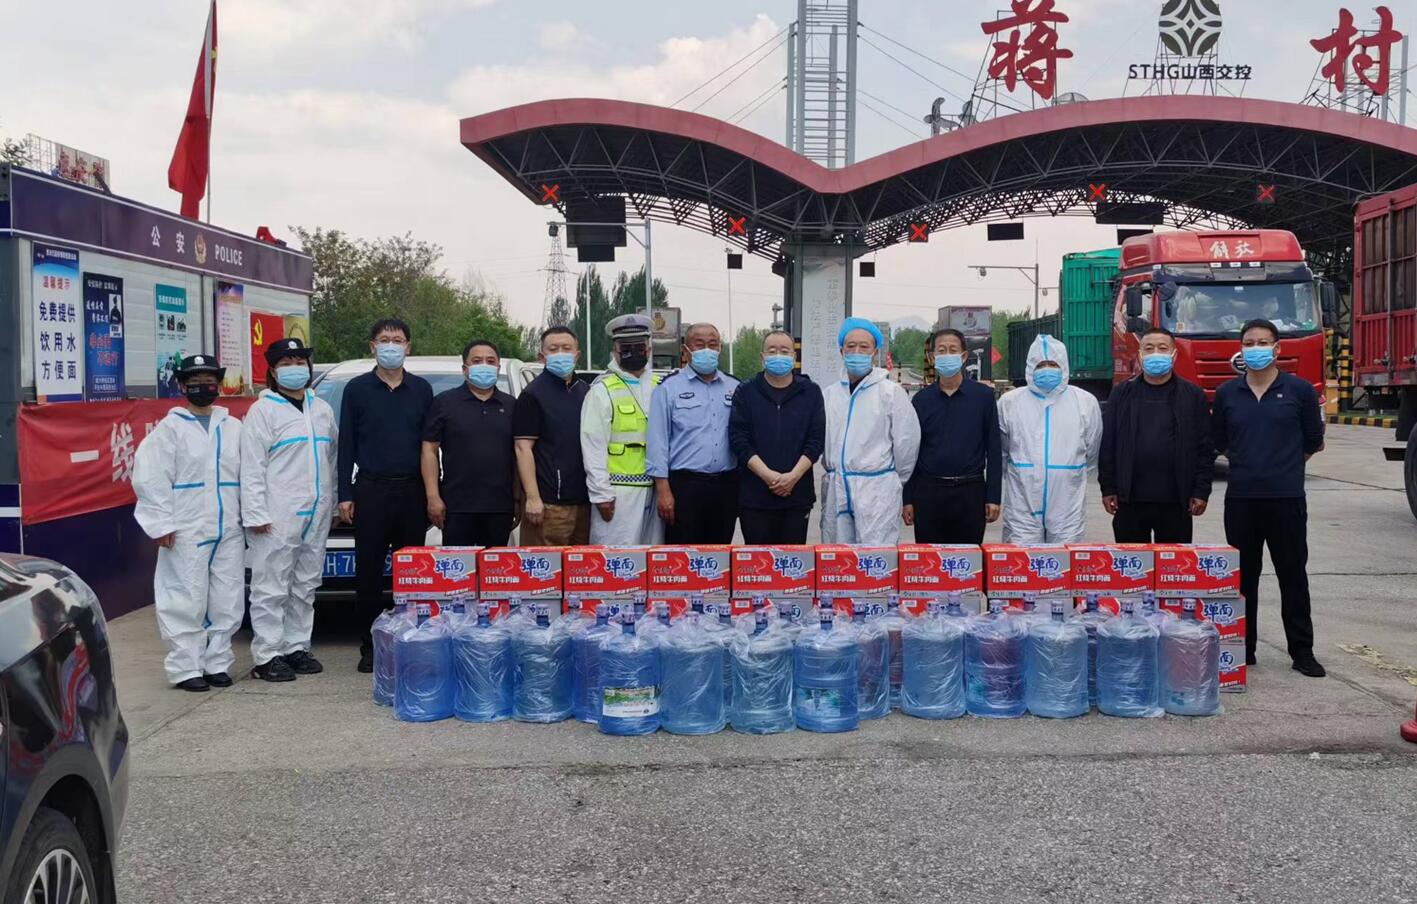 Shanxi Huanguan Heavy Industry Group Co., Ltd. group leaders condoled the staff on the front line of epidemic prevention